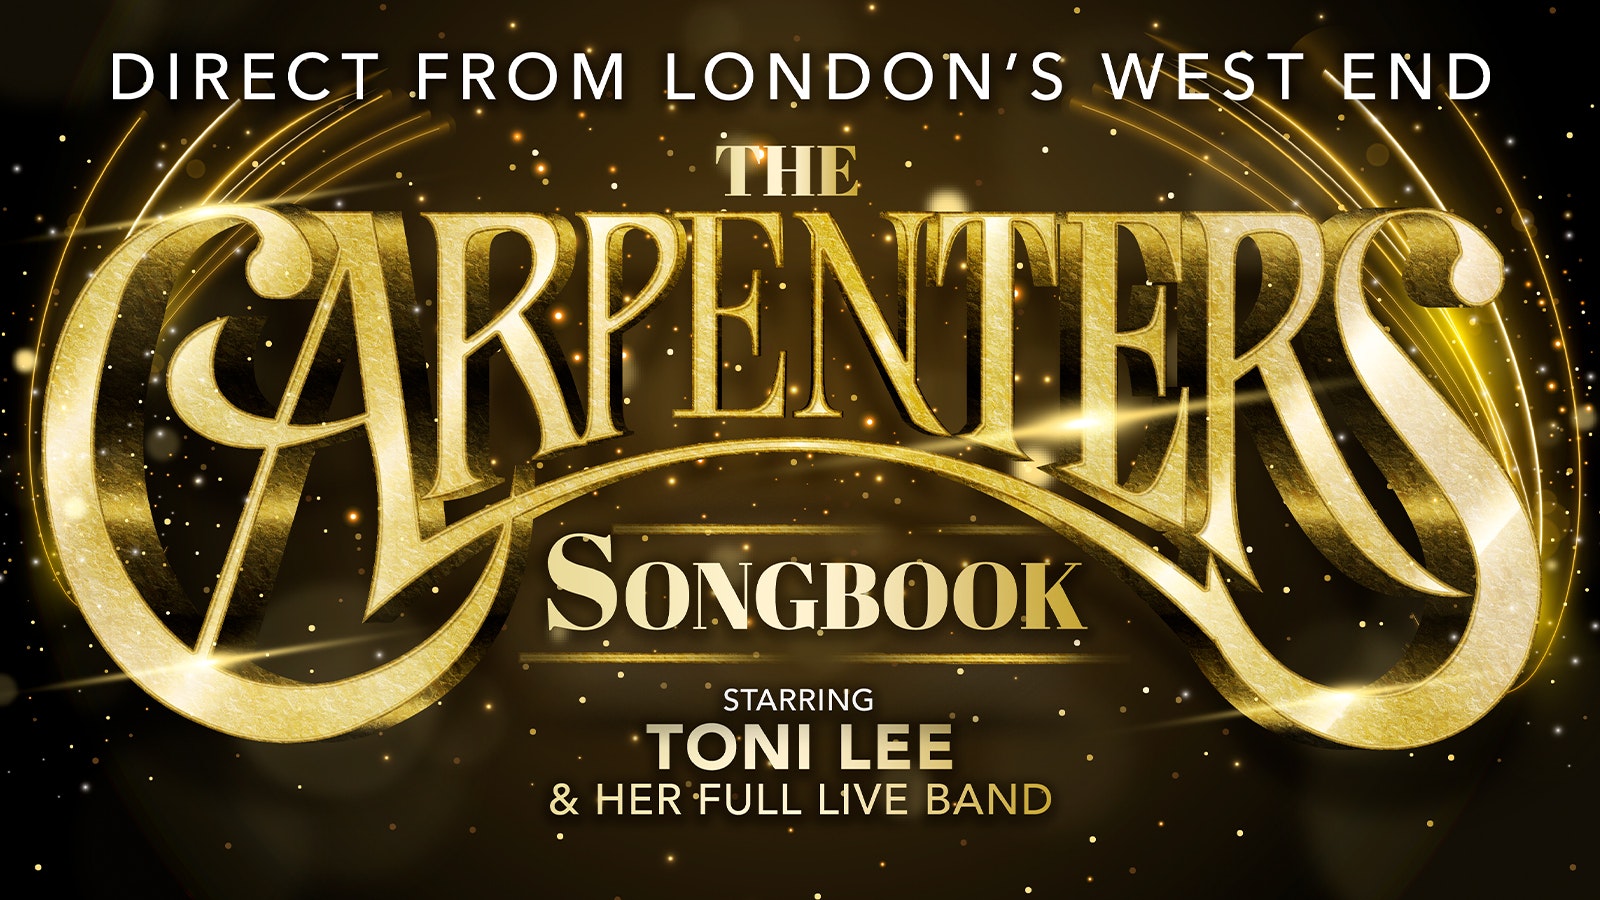 The Carpenters Songbook – starring Toni Lee and her live band